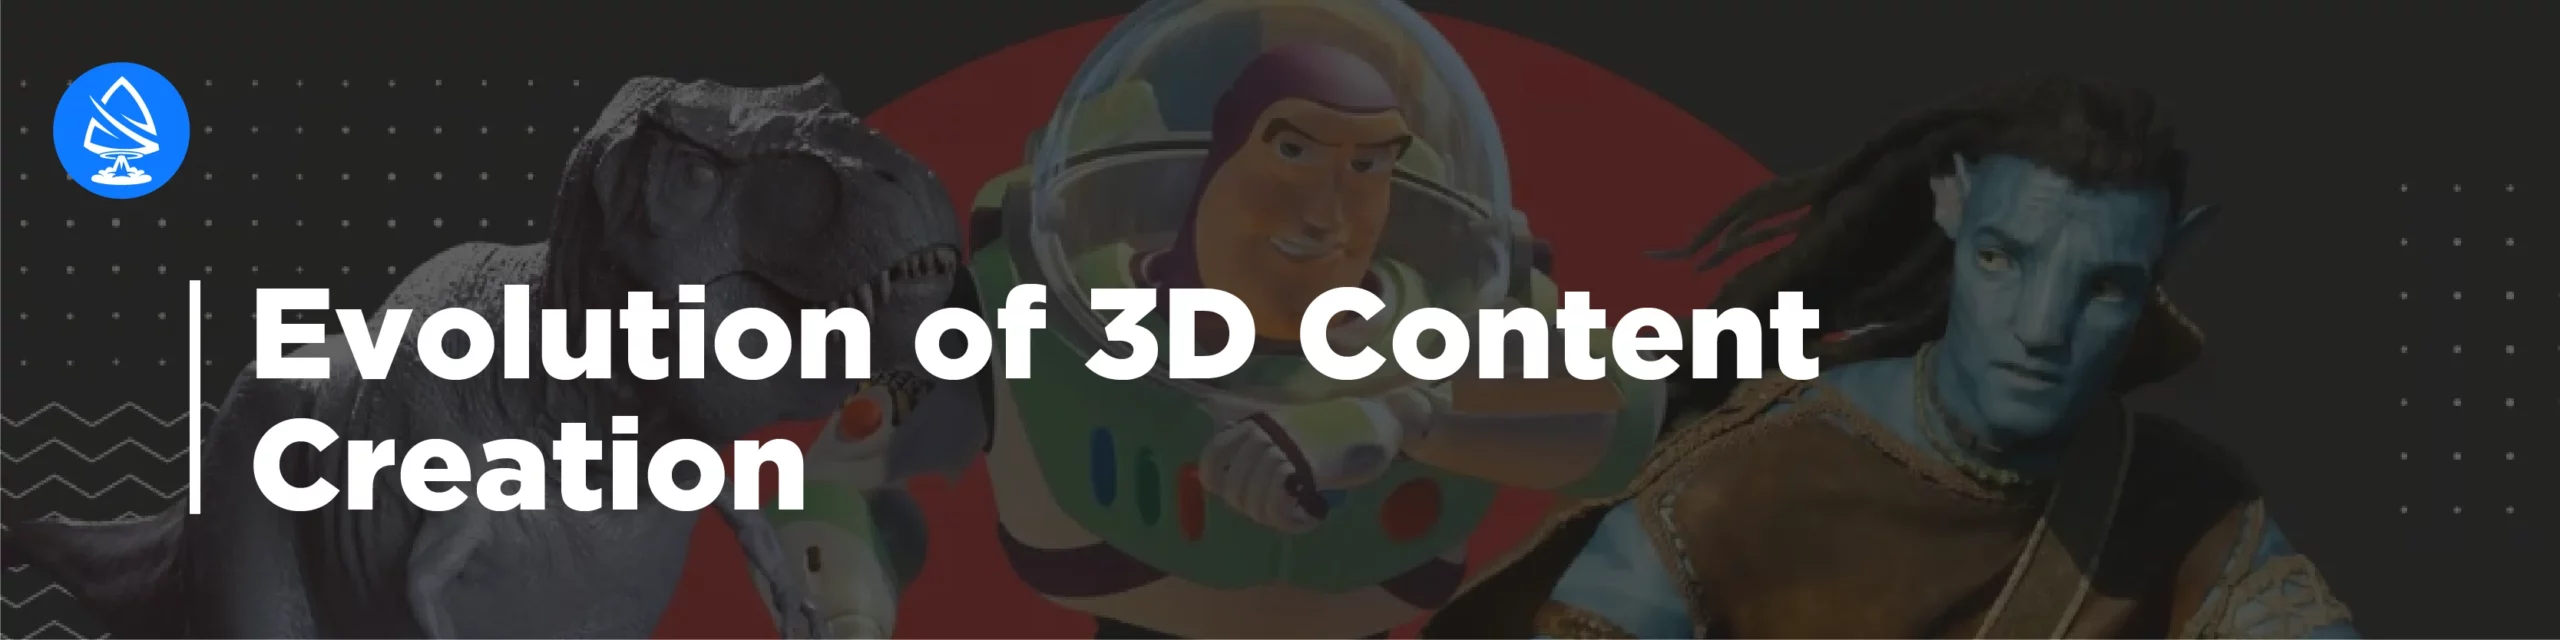 Evolution of 3D Content Creation